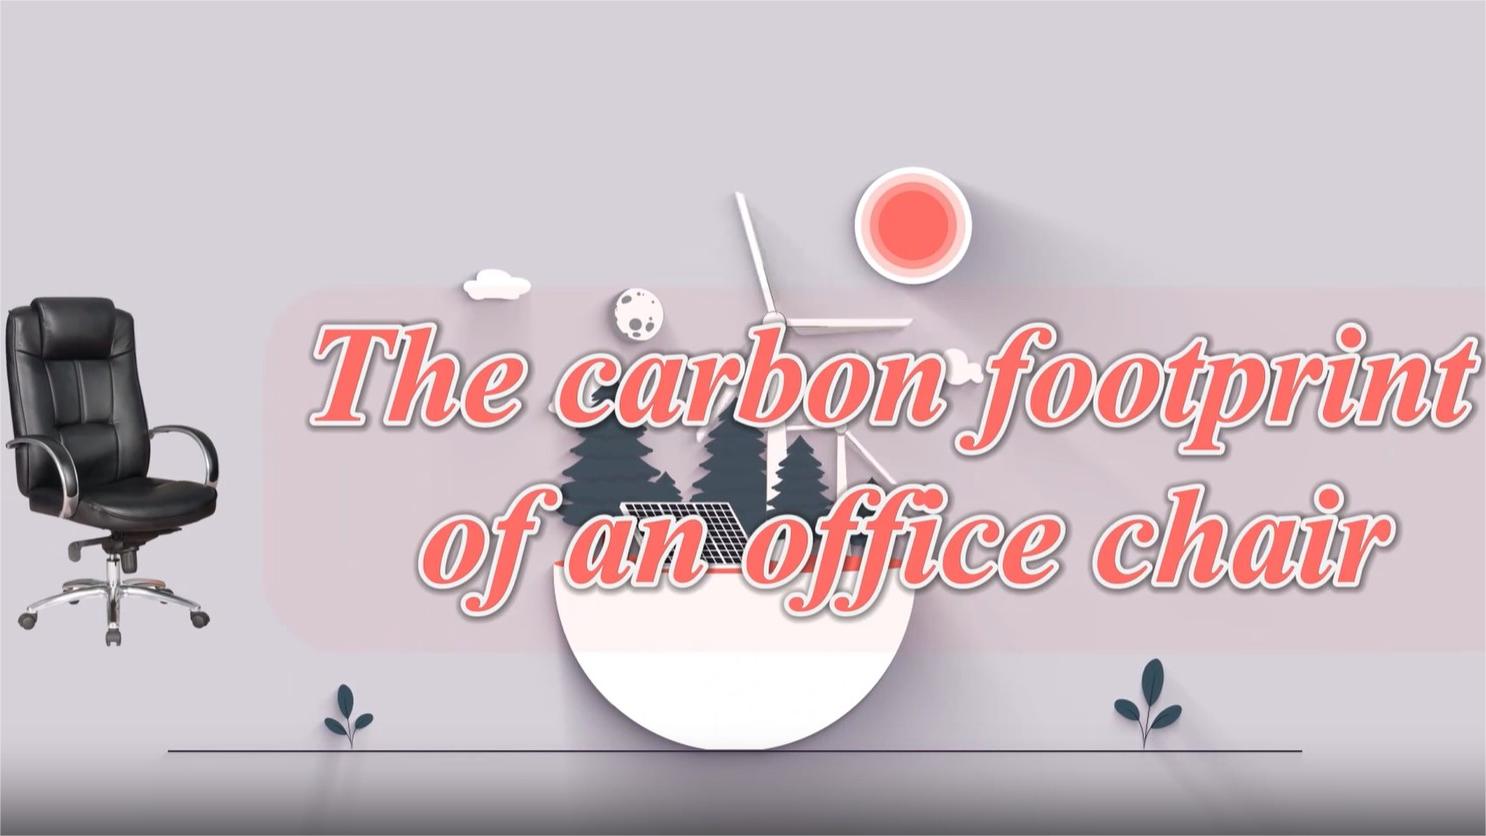 What is the carbon footprint of producing an office chair?